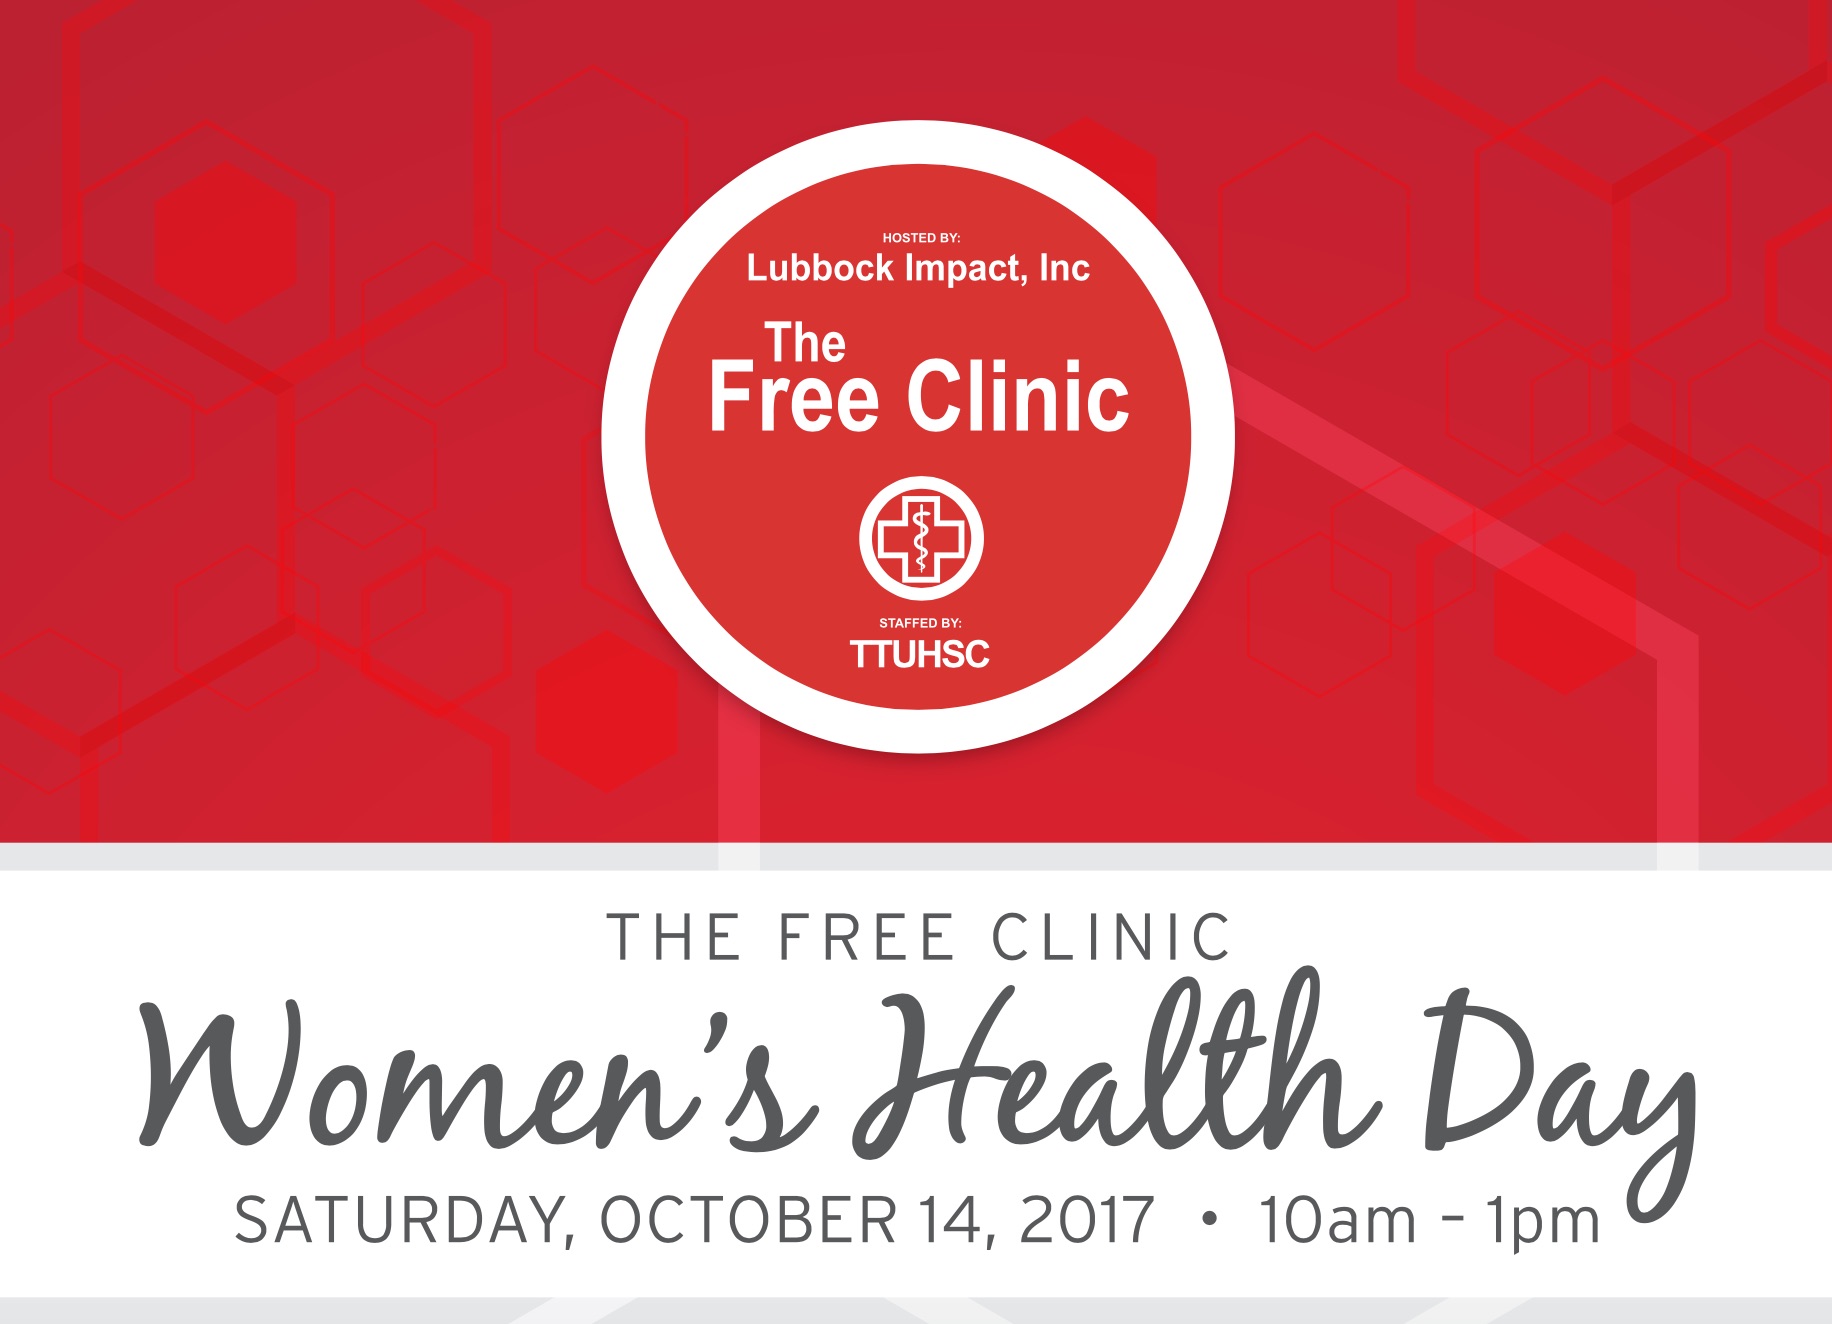 Free Clinic Offered for Women’s Health Day